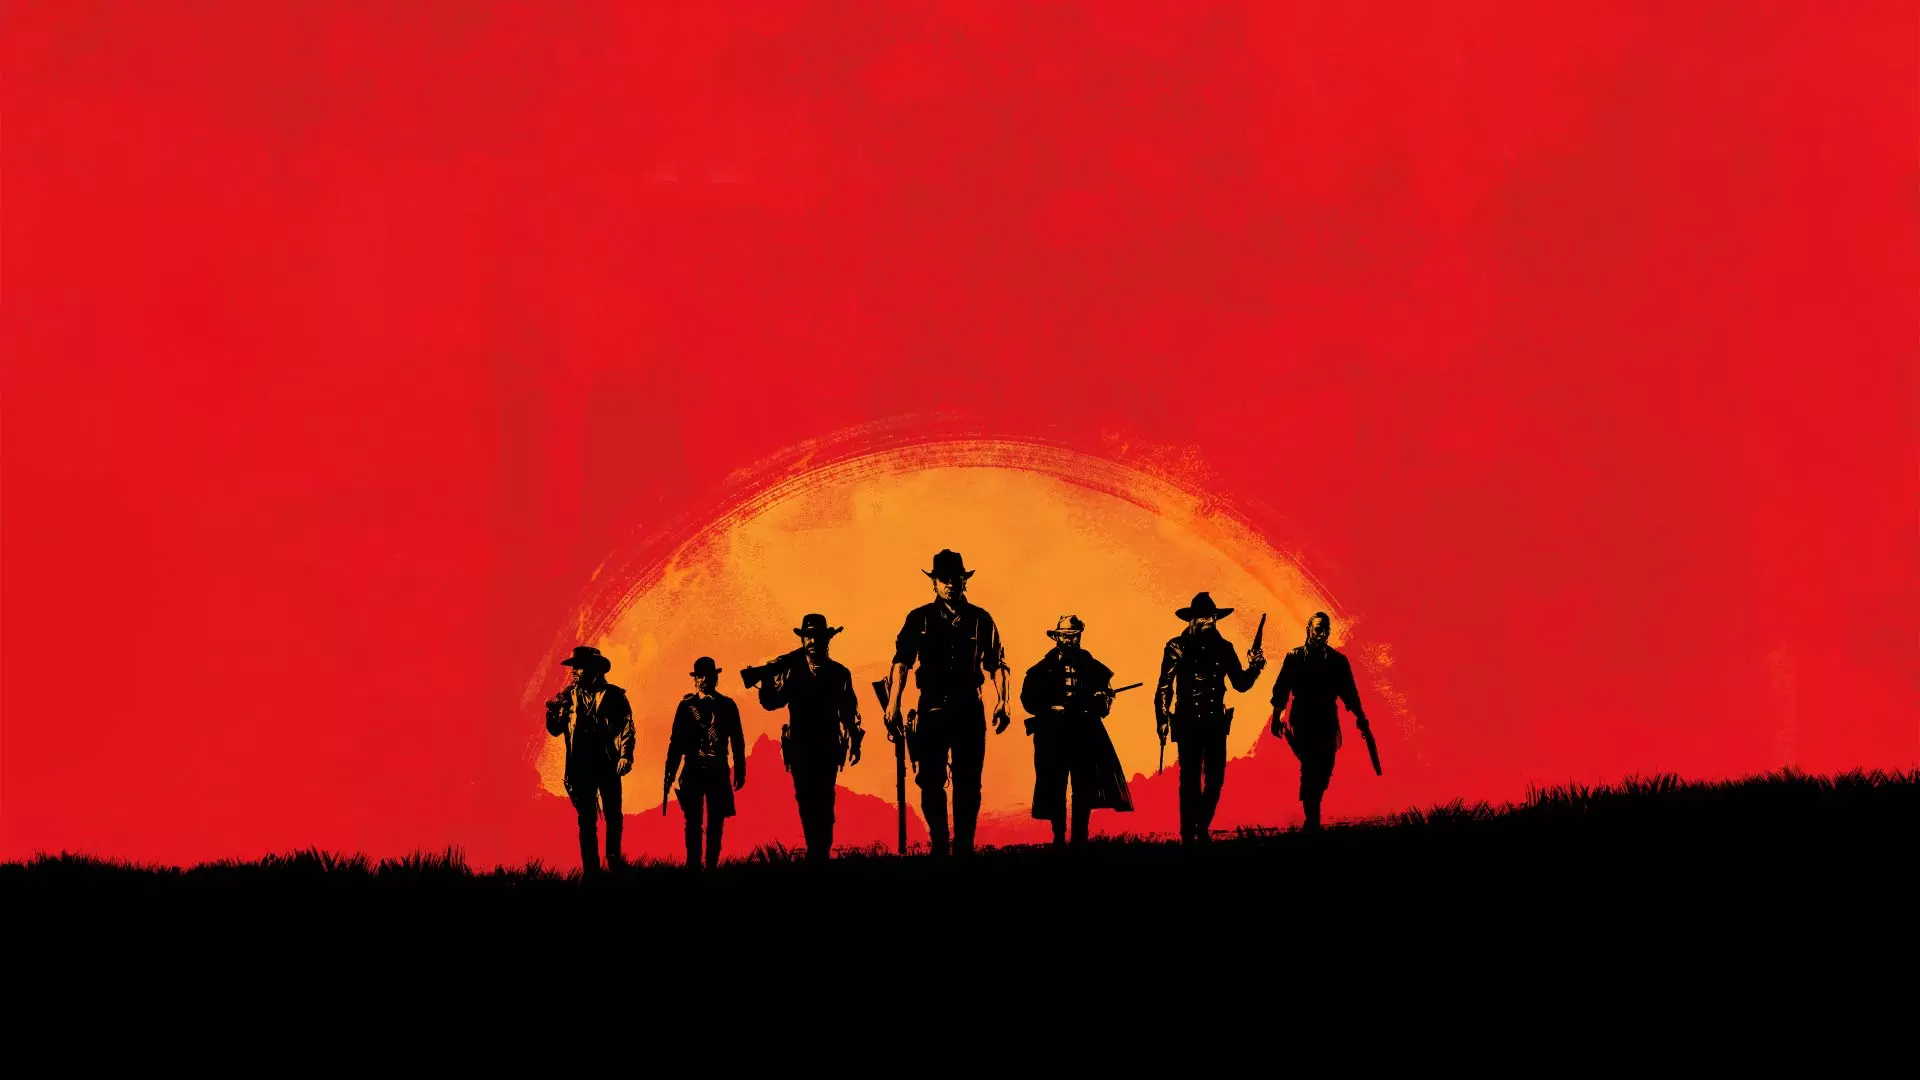 Members of the Dutch group in Red Dead Redemption 2